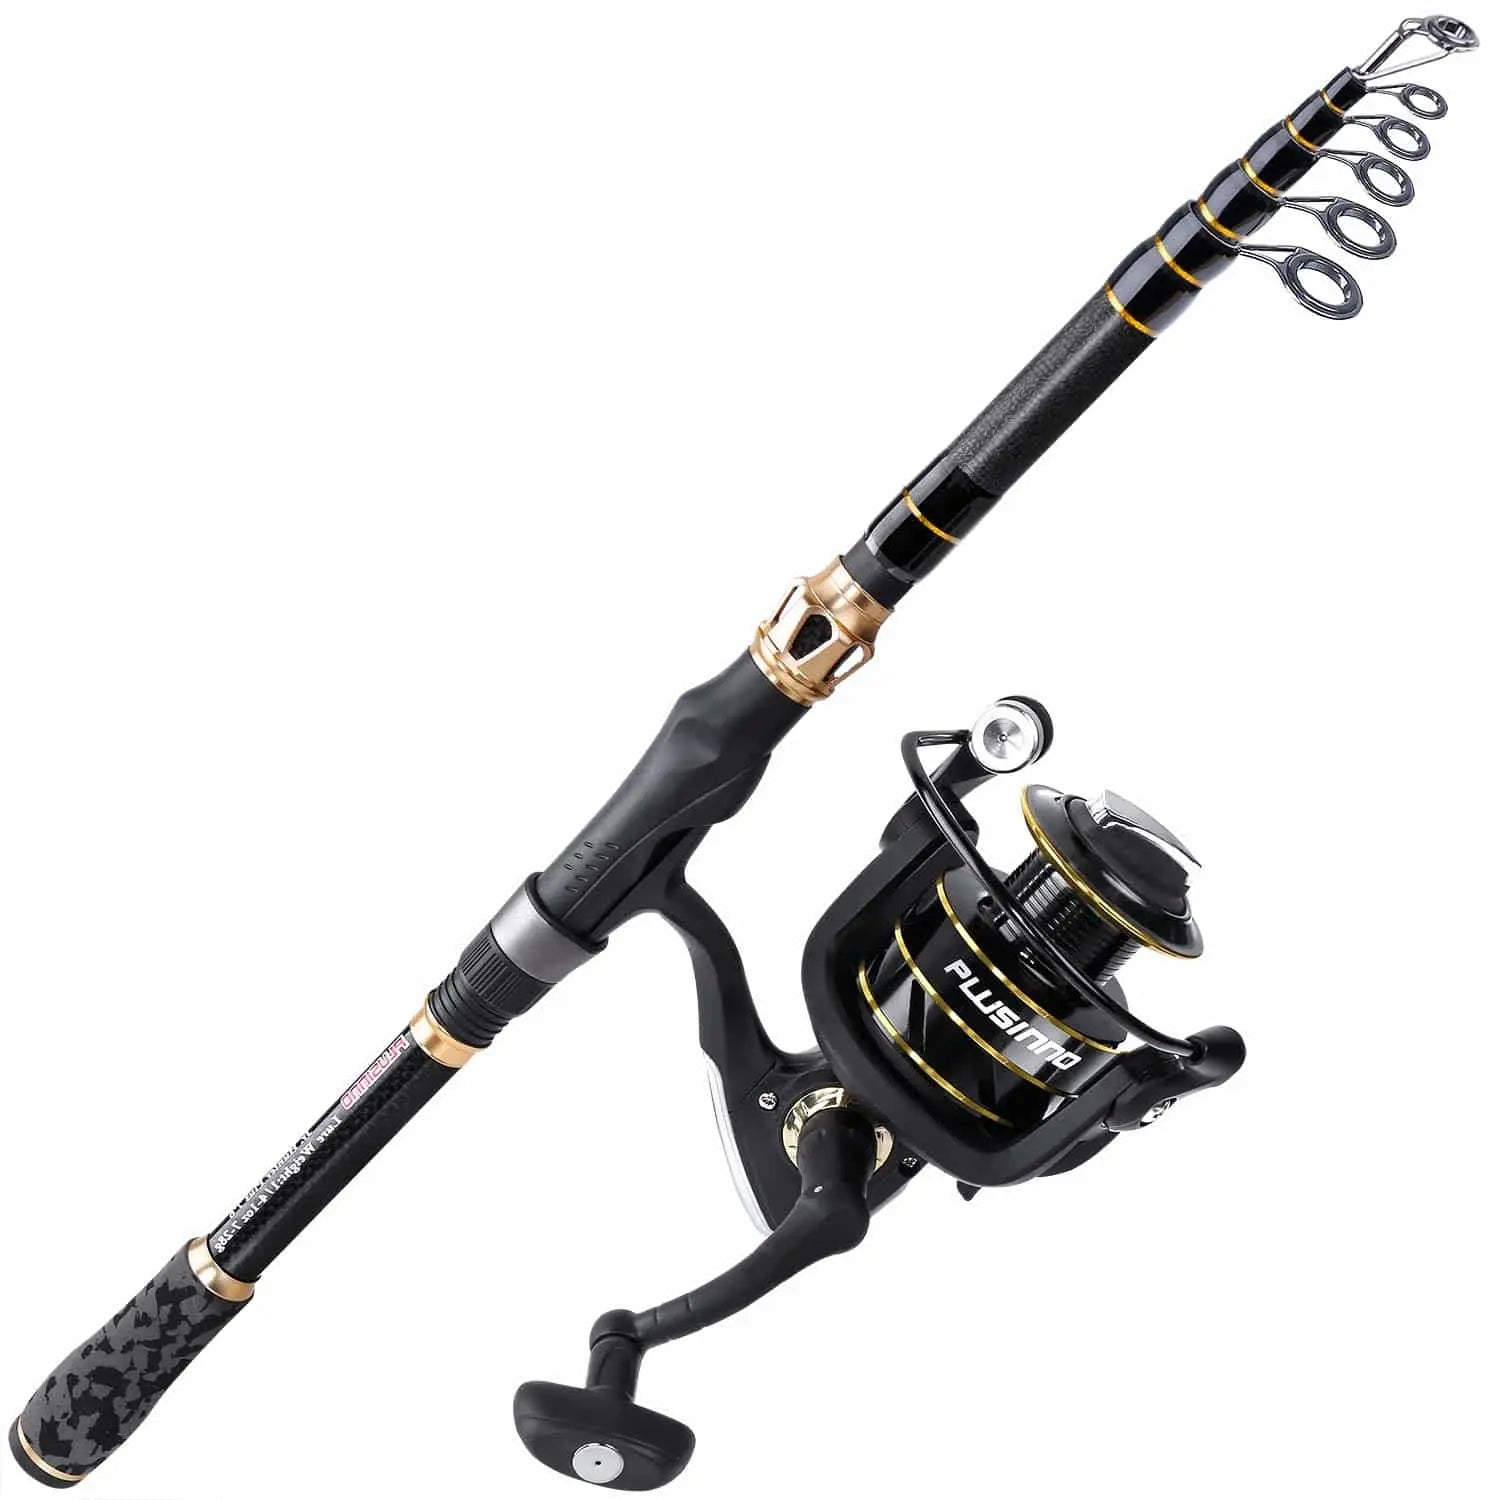 PLUSINNO Eagle Hunting VI Telescopic Fishing Rods and Reel Combos